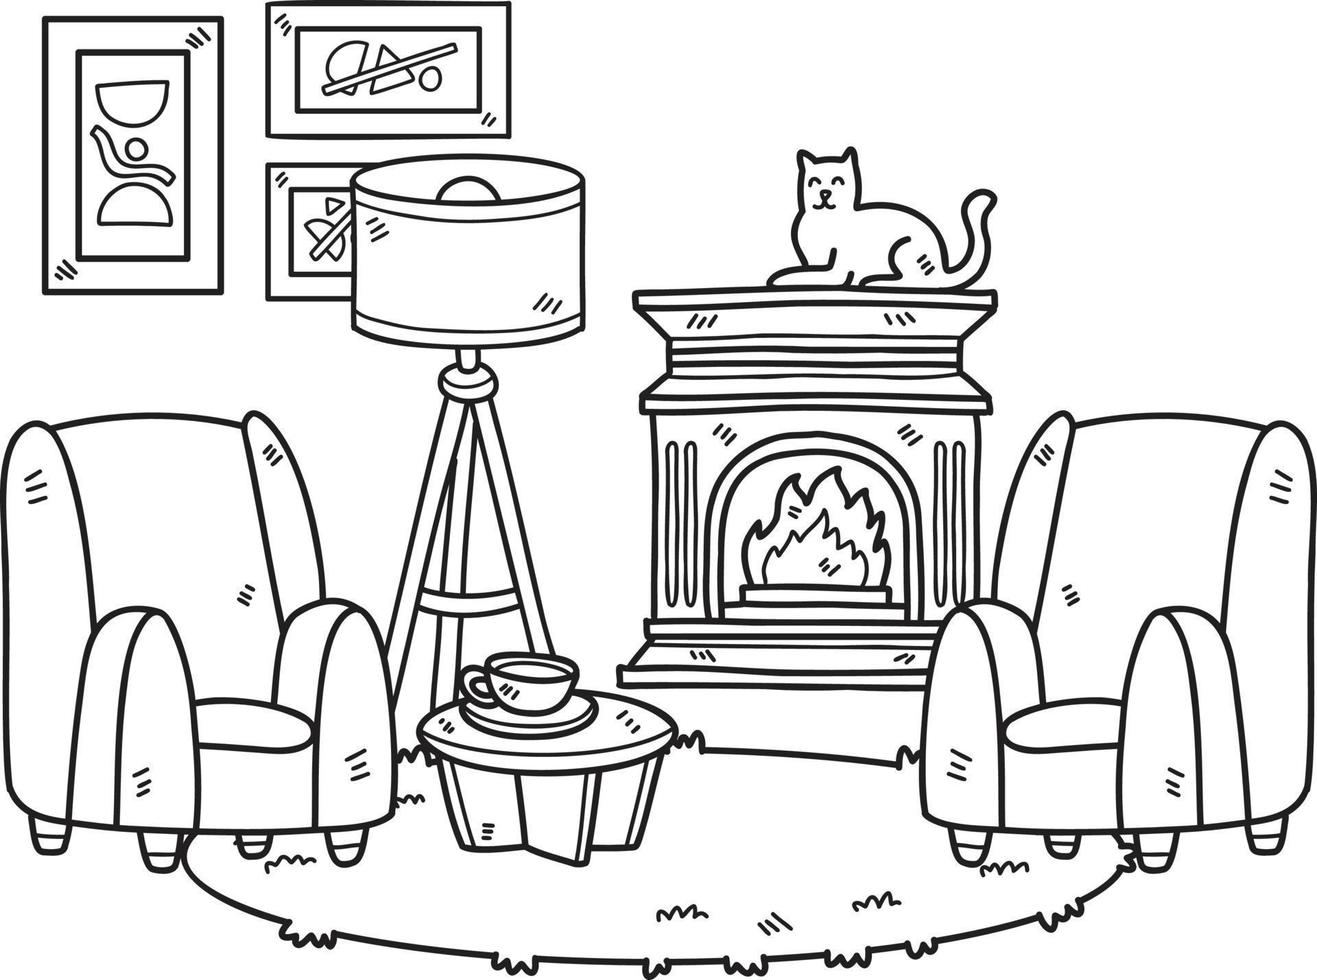 Hand Drawn Fireplace with cats and sofa interior room illustration vector